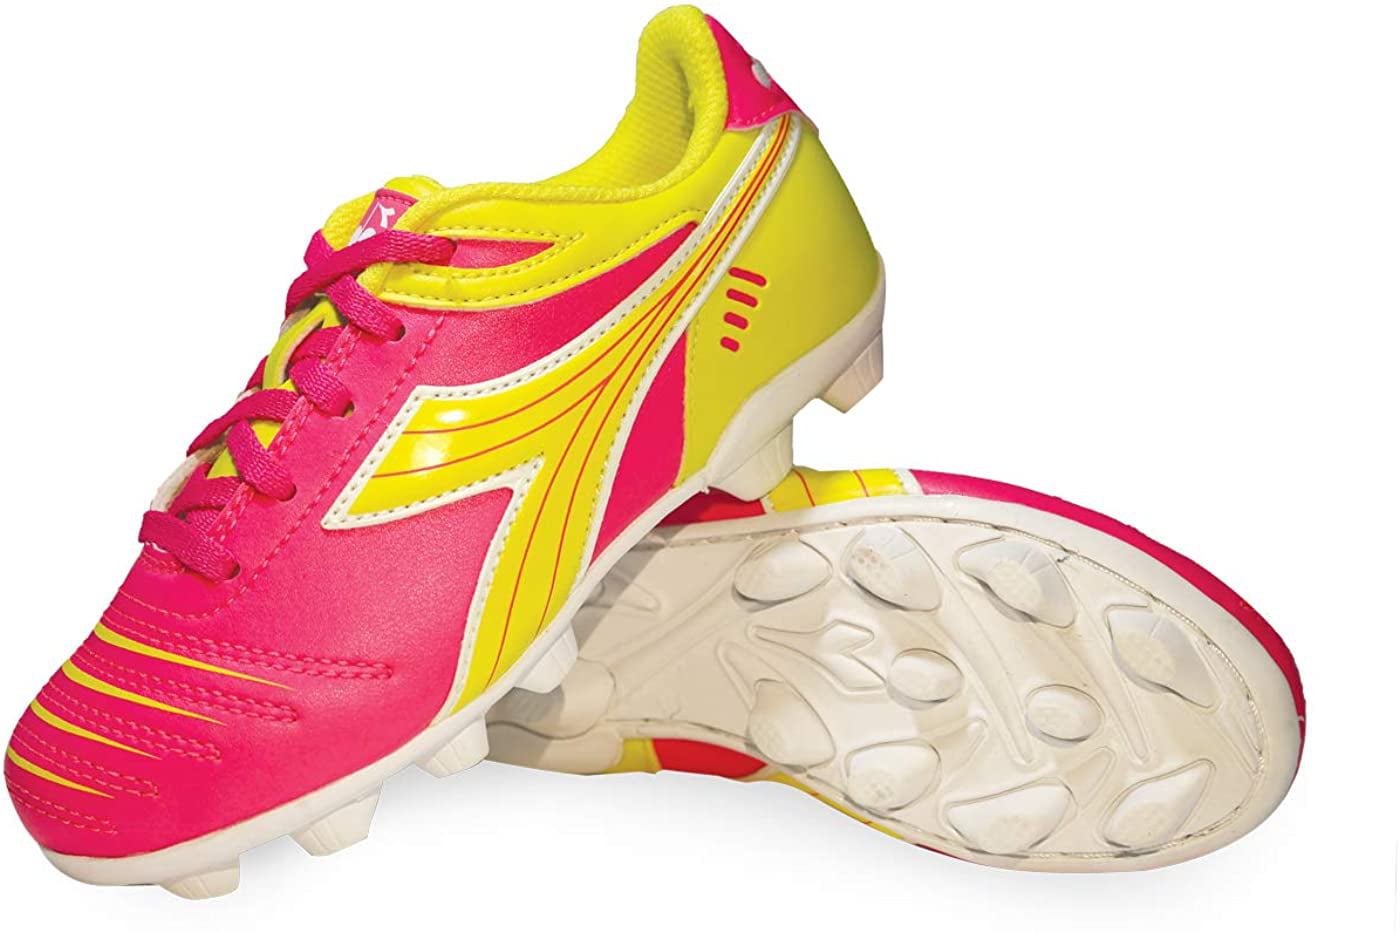 neon pink cleats